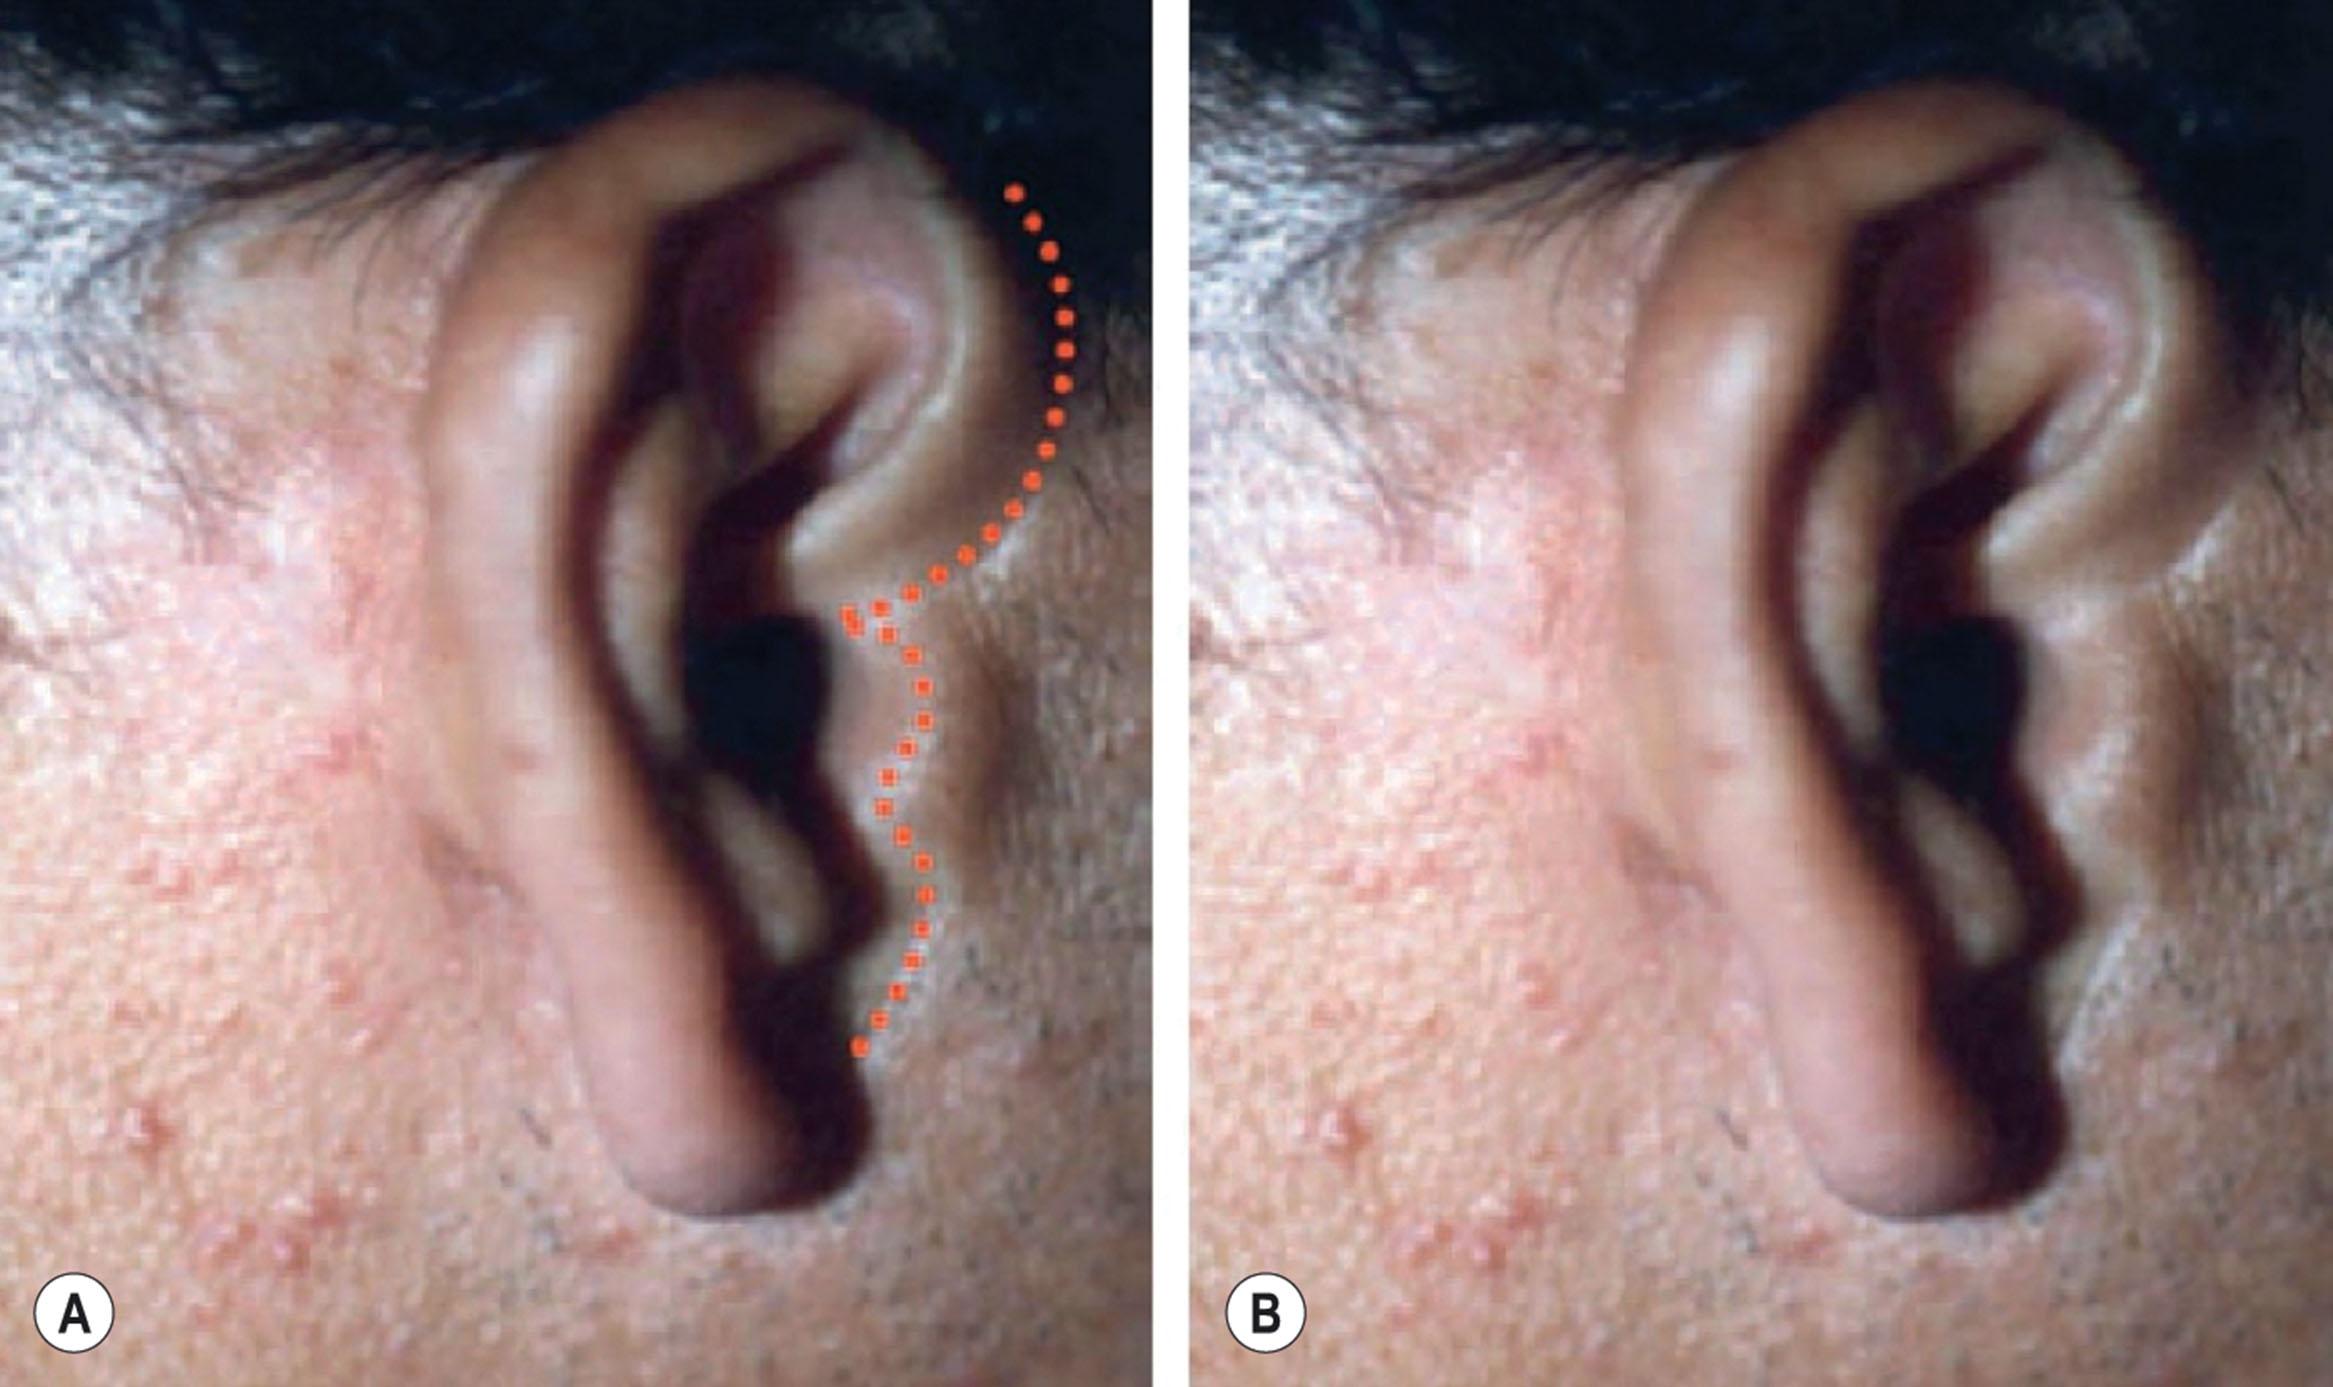 Figure 9.8.17, Optimal position of the pre-auricular incision. (A) Placing the pre-auricular scar along natural anatomic interfaces (red dotted line) places transitions of color and texture in locations where the eye is expecting to see them concealing them, and the scar itself if seen will appear as a reflected highlight (see Fig. 9.8.17B ) (B) Note that the scar although hypopigmented and situated on darker skin and visible, appears to the eye to be a reflected highlight along the anterior border of the helix and the posterior margin of the tragus, and elsewhere where the incision was made. Note also how gradients of color and texture on each side of the scar appear expected and natural. A similar illusion and concealment would not be present had the incision been placed in a pretragal location.